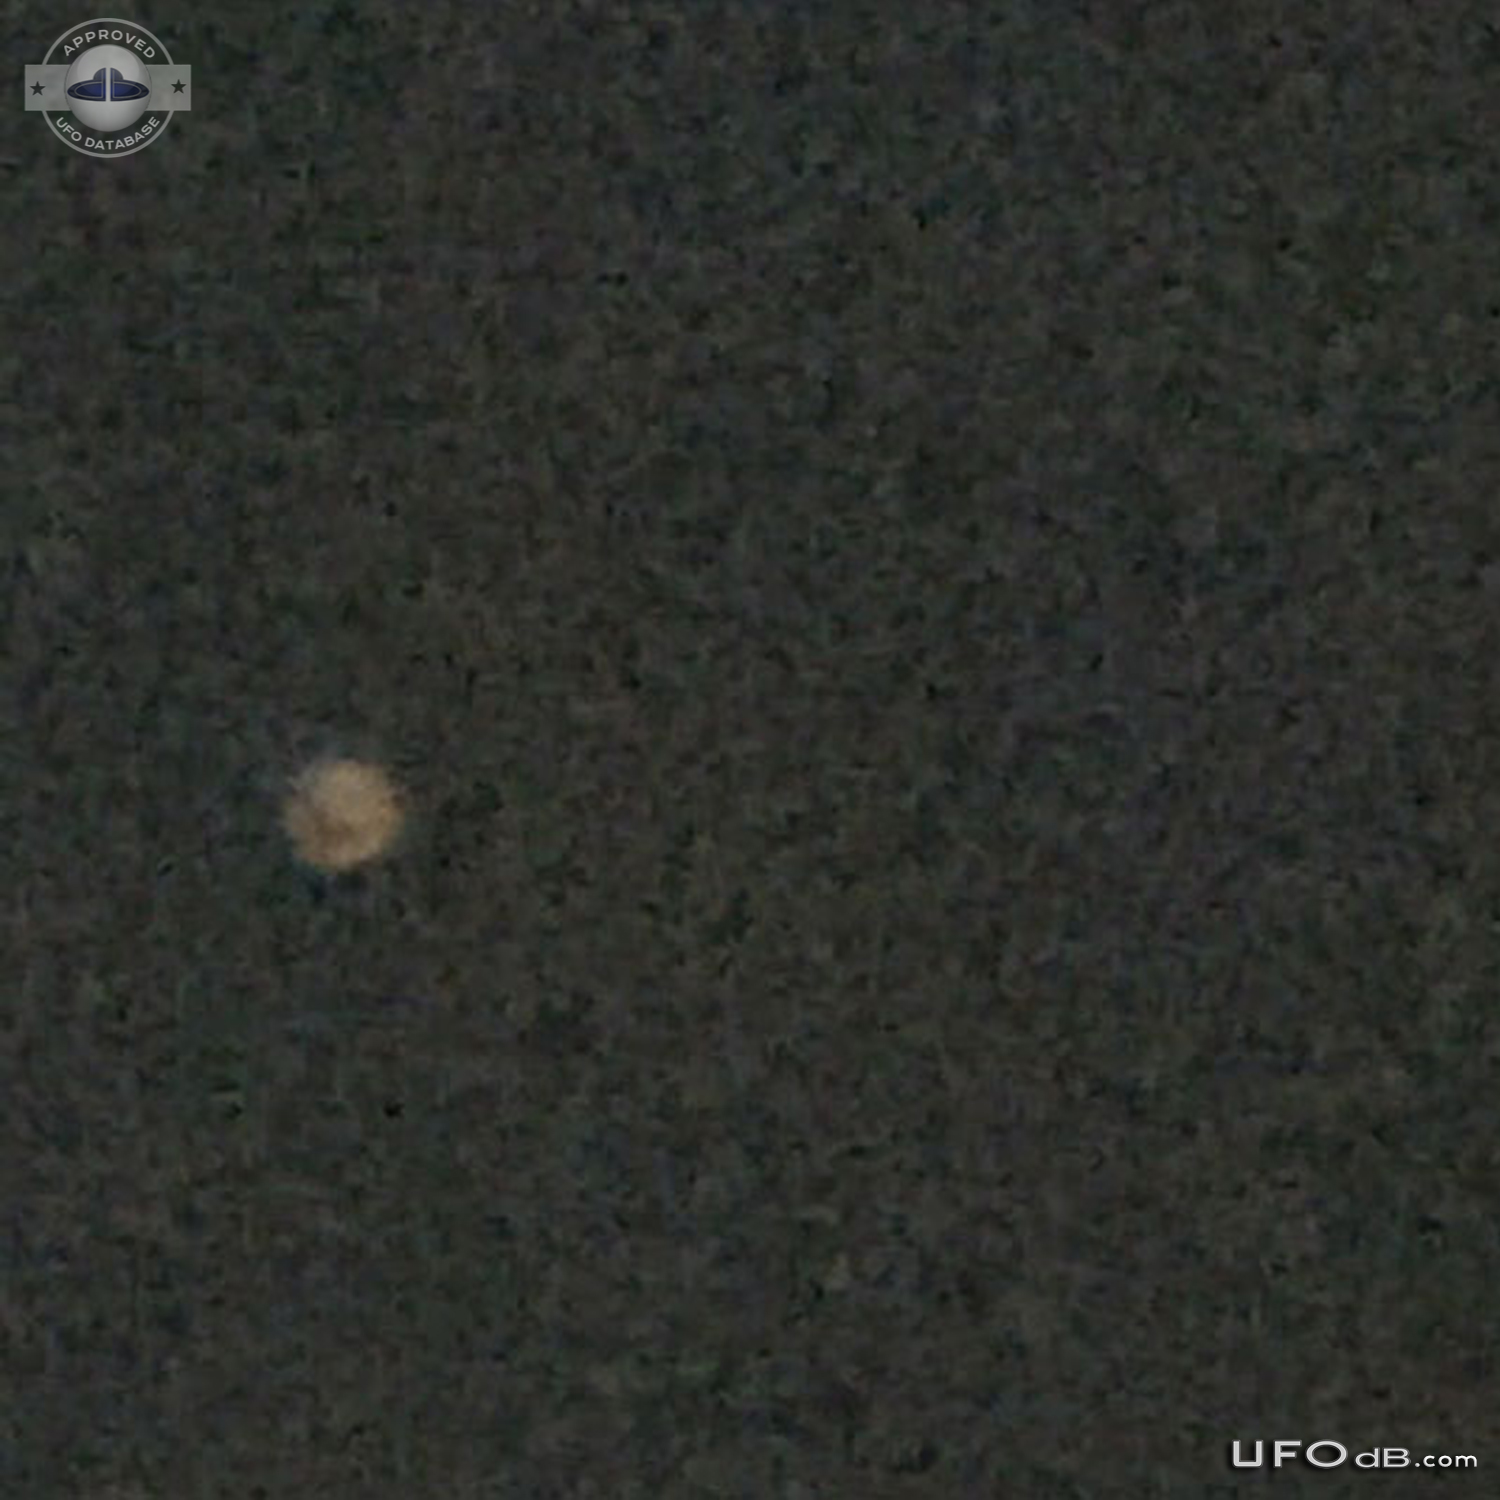 Many hovering UFOs with planes flying around them Weatherford, Texas UFO Picture #619-3